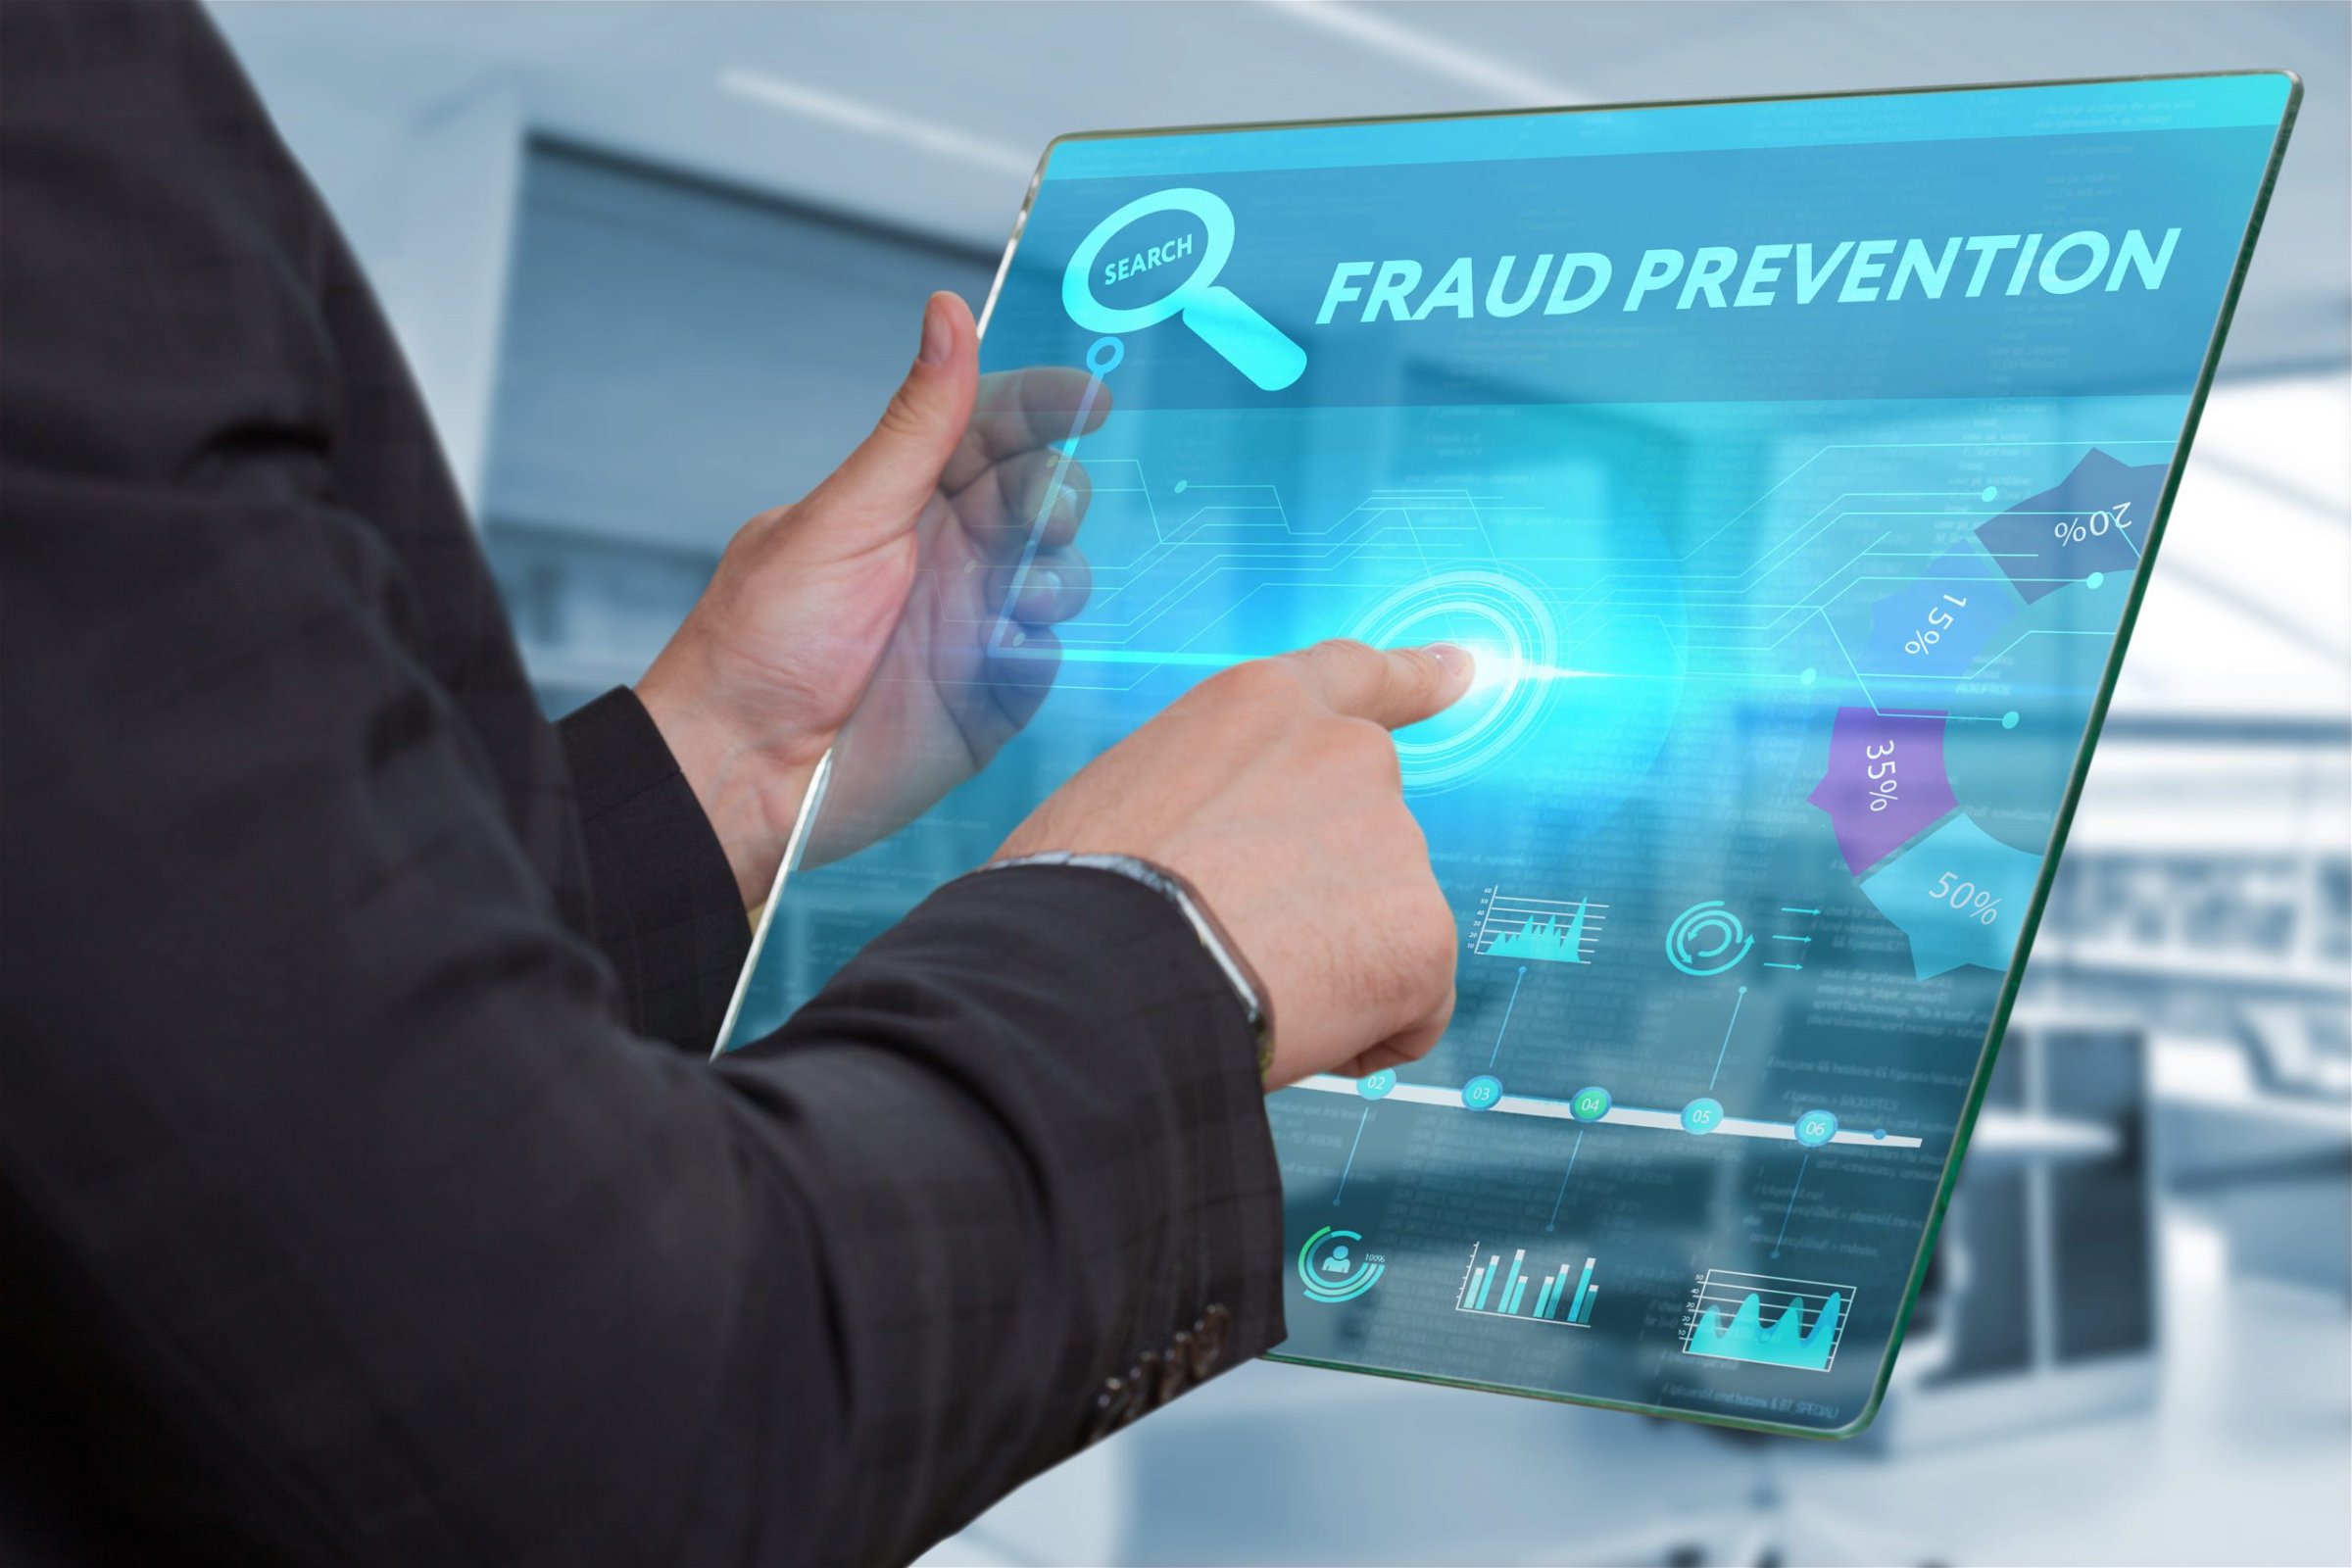 How does Data Analytics help to Detect, Assess and Prevent Fraud in 2021?